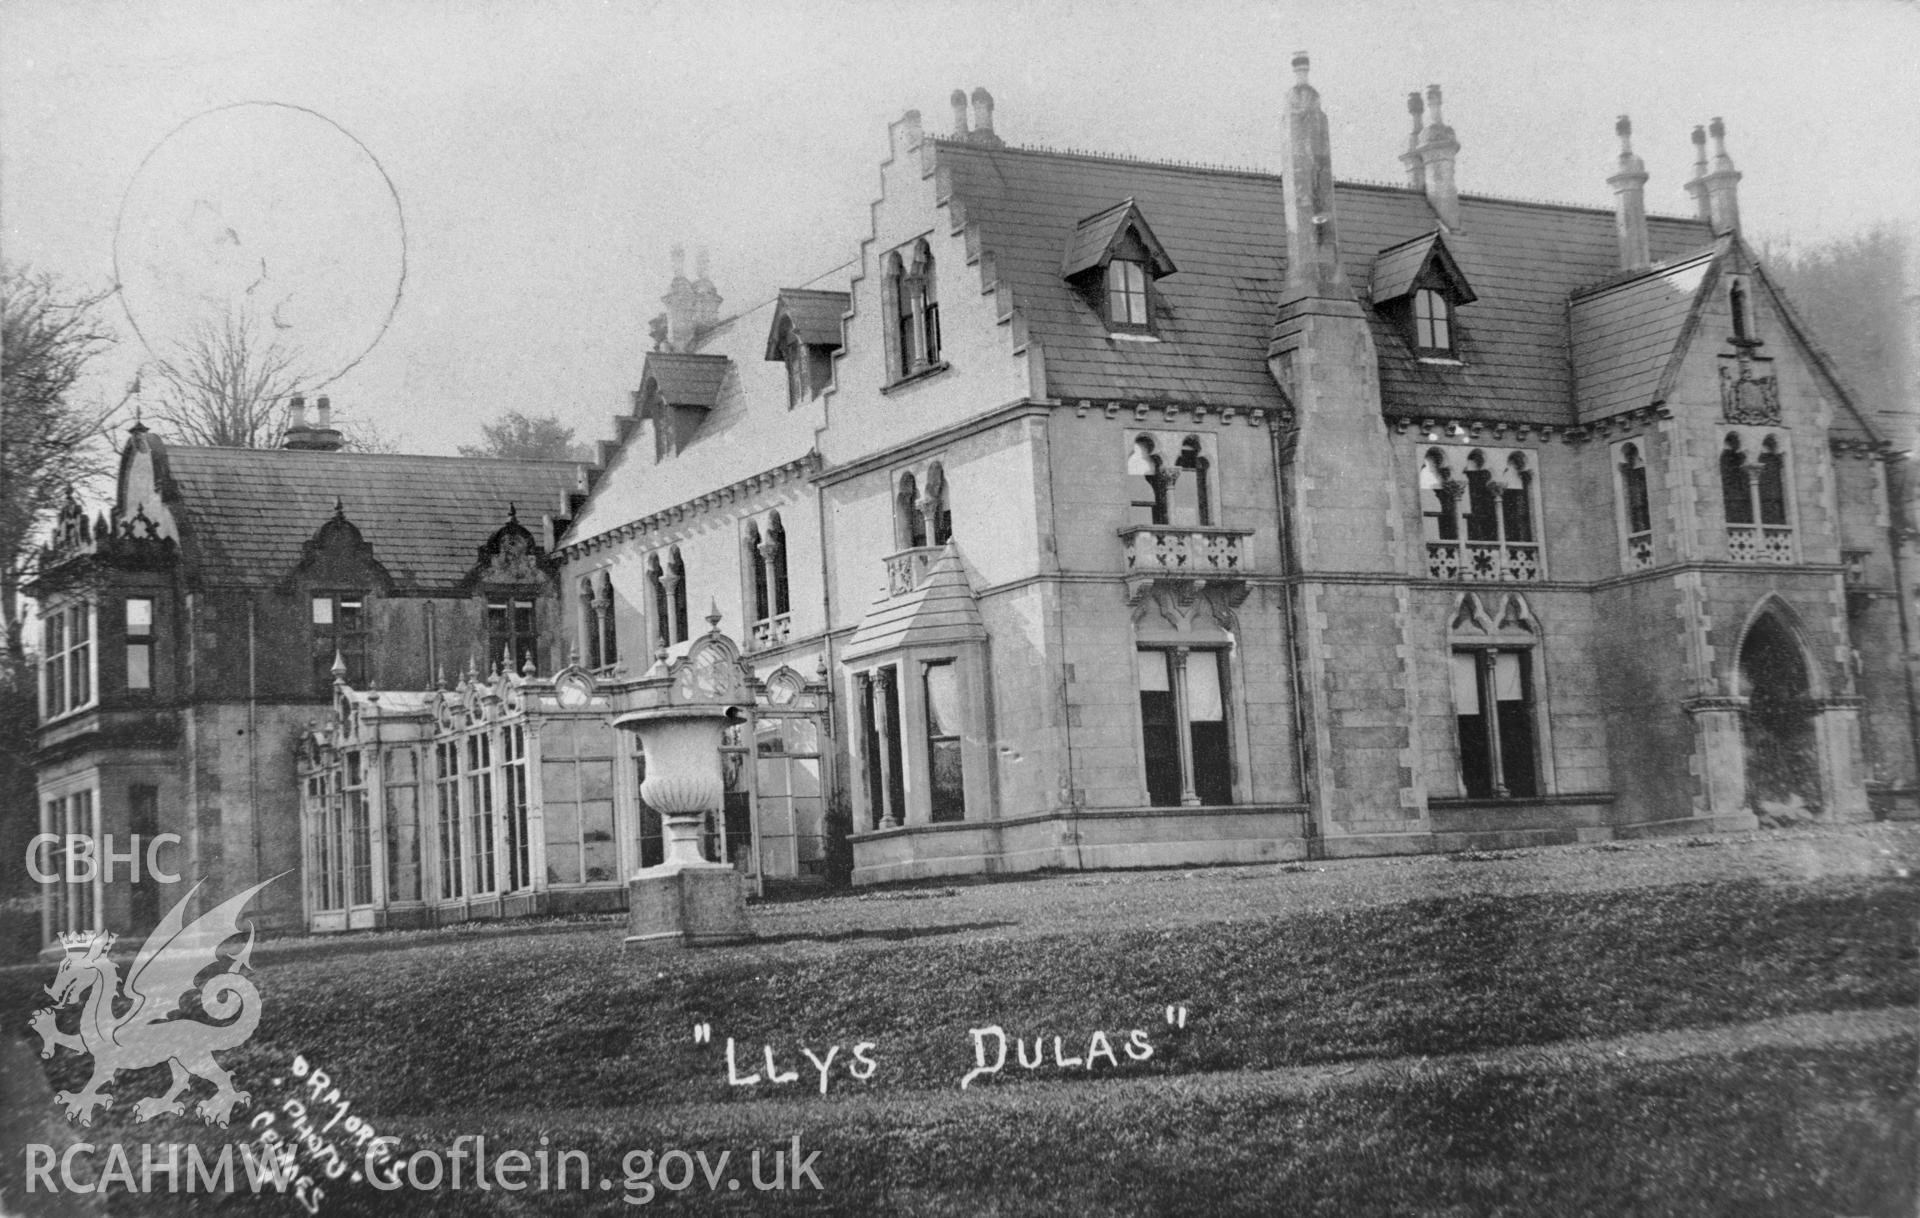 Copy of black and white image of Llys Dulas, Llaneilian, copied from early postcard showing exterior, loaned by Thomas Lloyd.